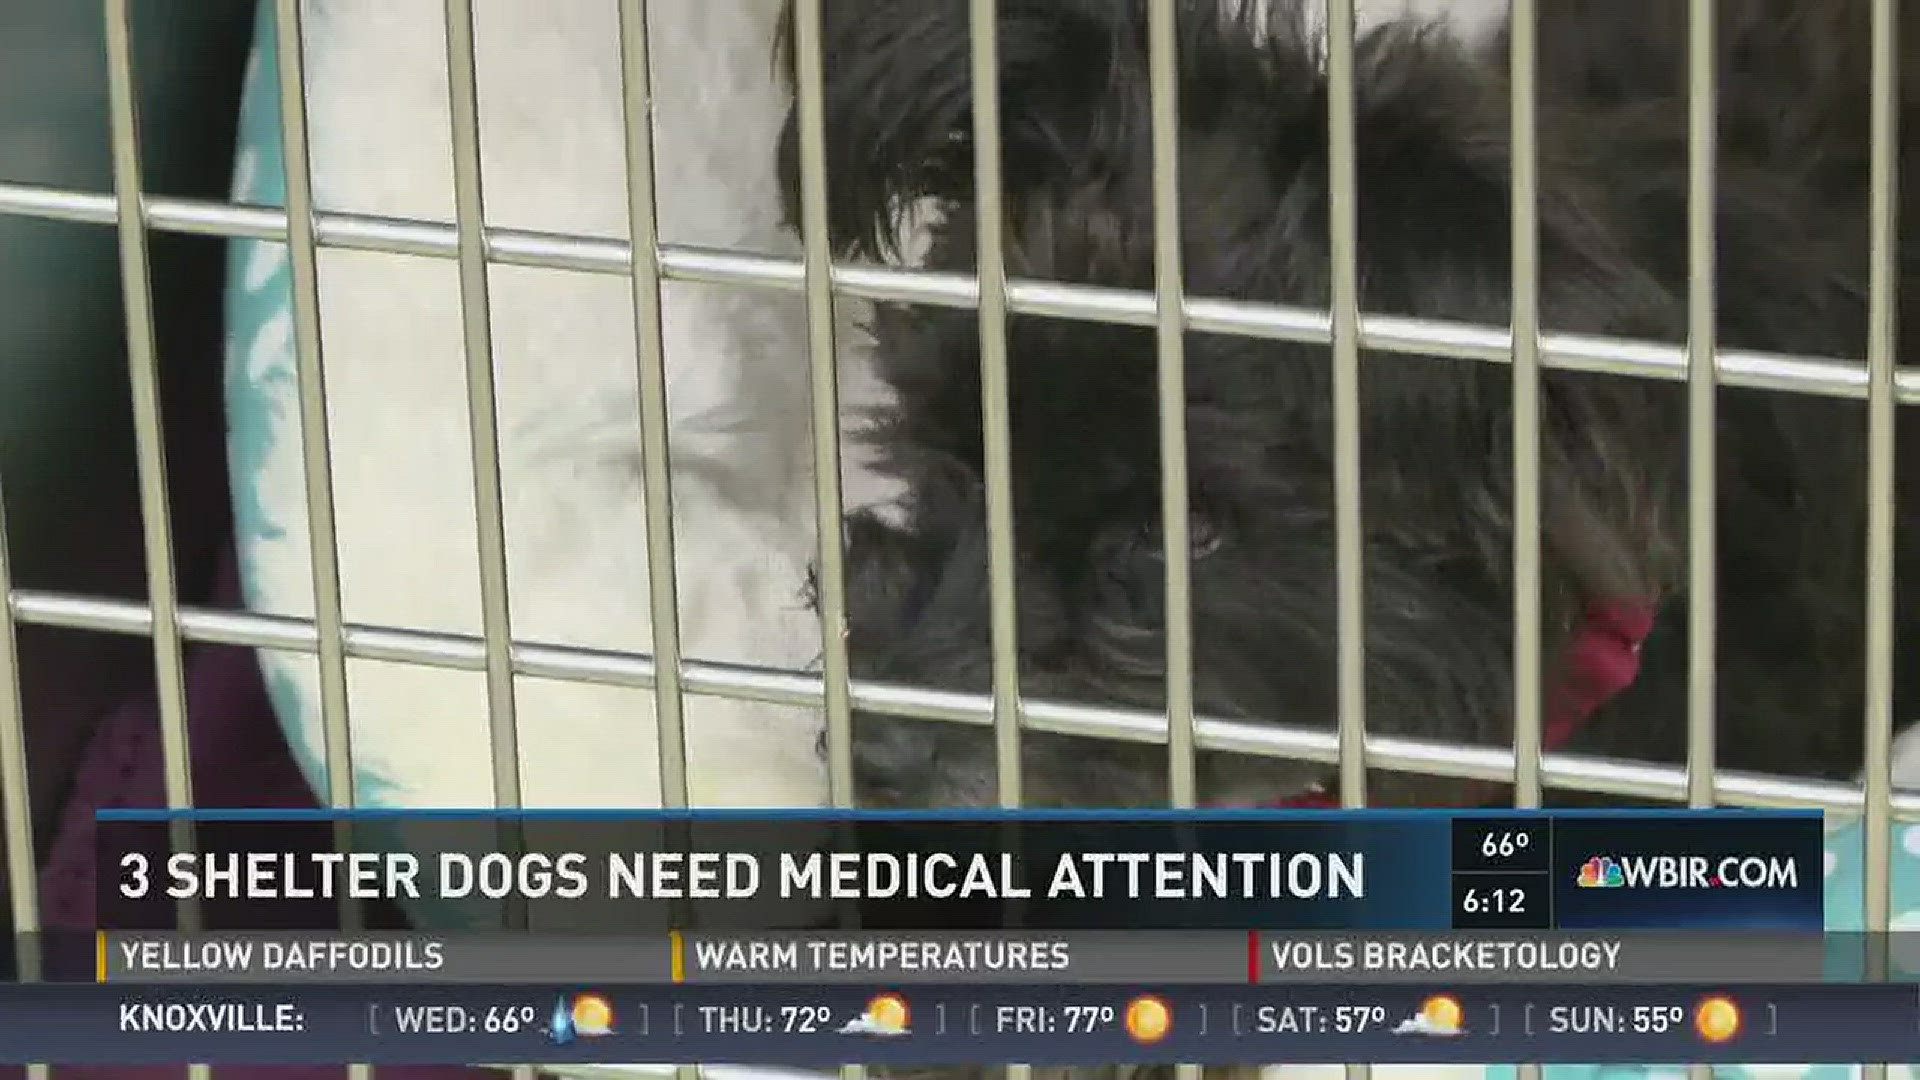 Feb. 21, 2017: The Humane Society of the Tennessee Valley is asking for donations for three dogs in need of medical attention.